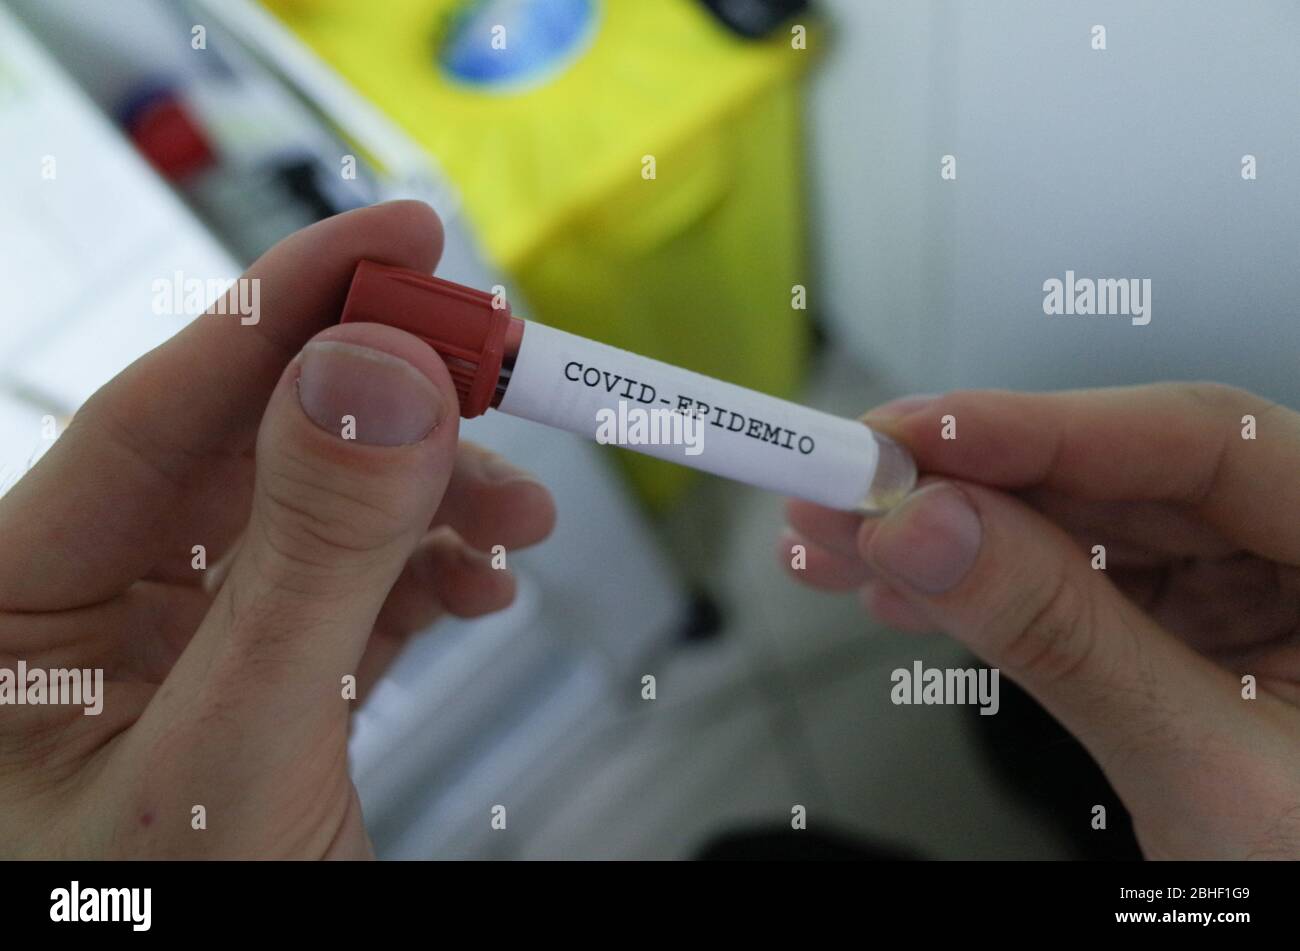 *** STRICTLY NO SALES TO FRENCH MEDIA OR PUBLISHERS - RIGHTS RESERVED ***April 23, 2020 - Stains, France: Close-up of a blood test for coronavirus antibodies. The diagnostic test are intended to intended to signal whether people may have built immunity to the virus before lifting the lockdown. Stock Photo